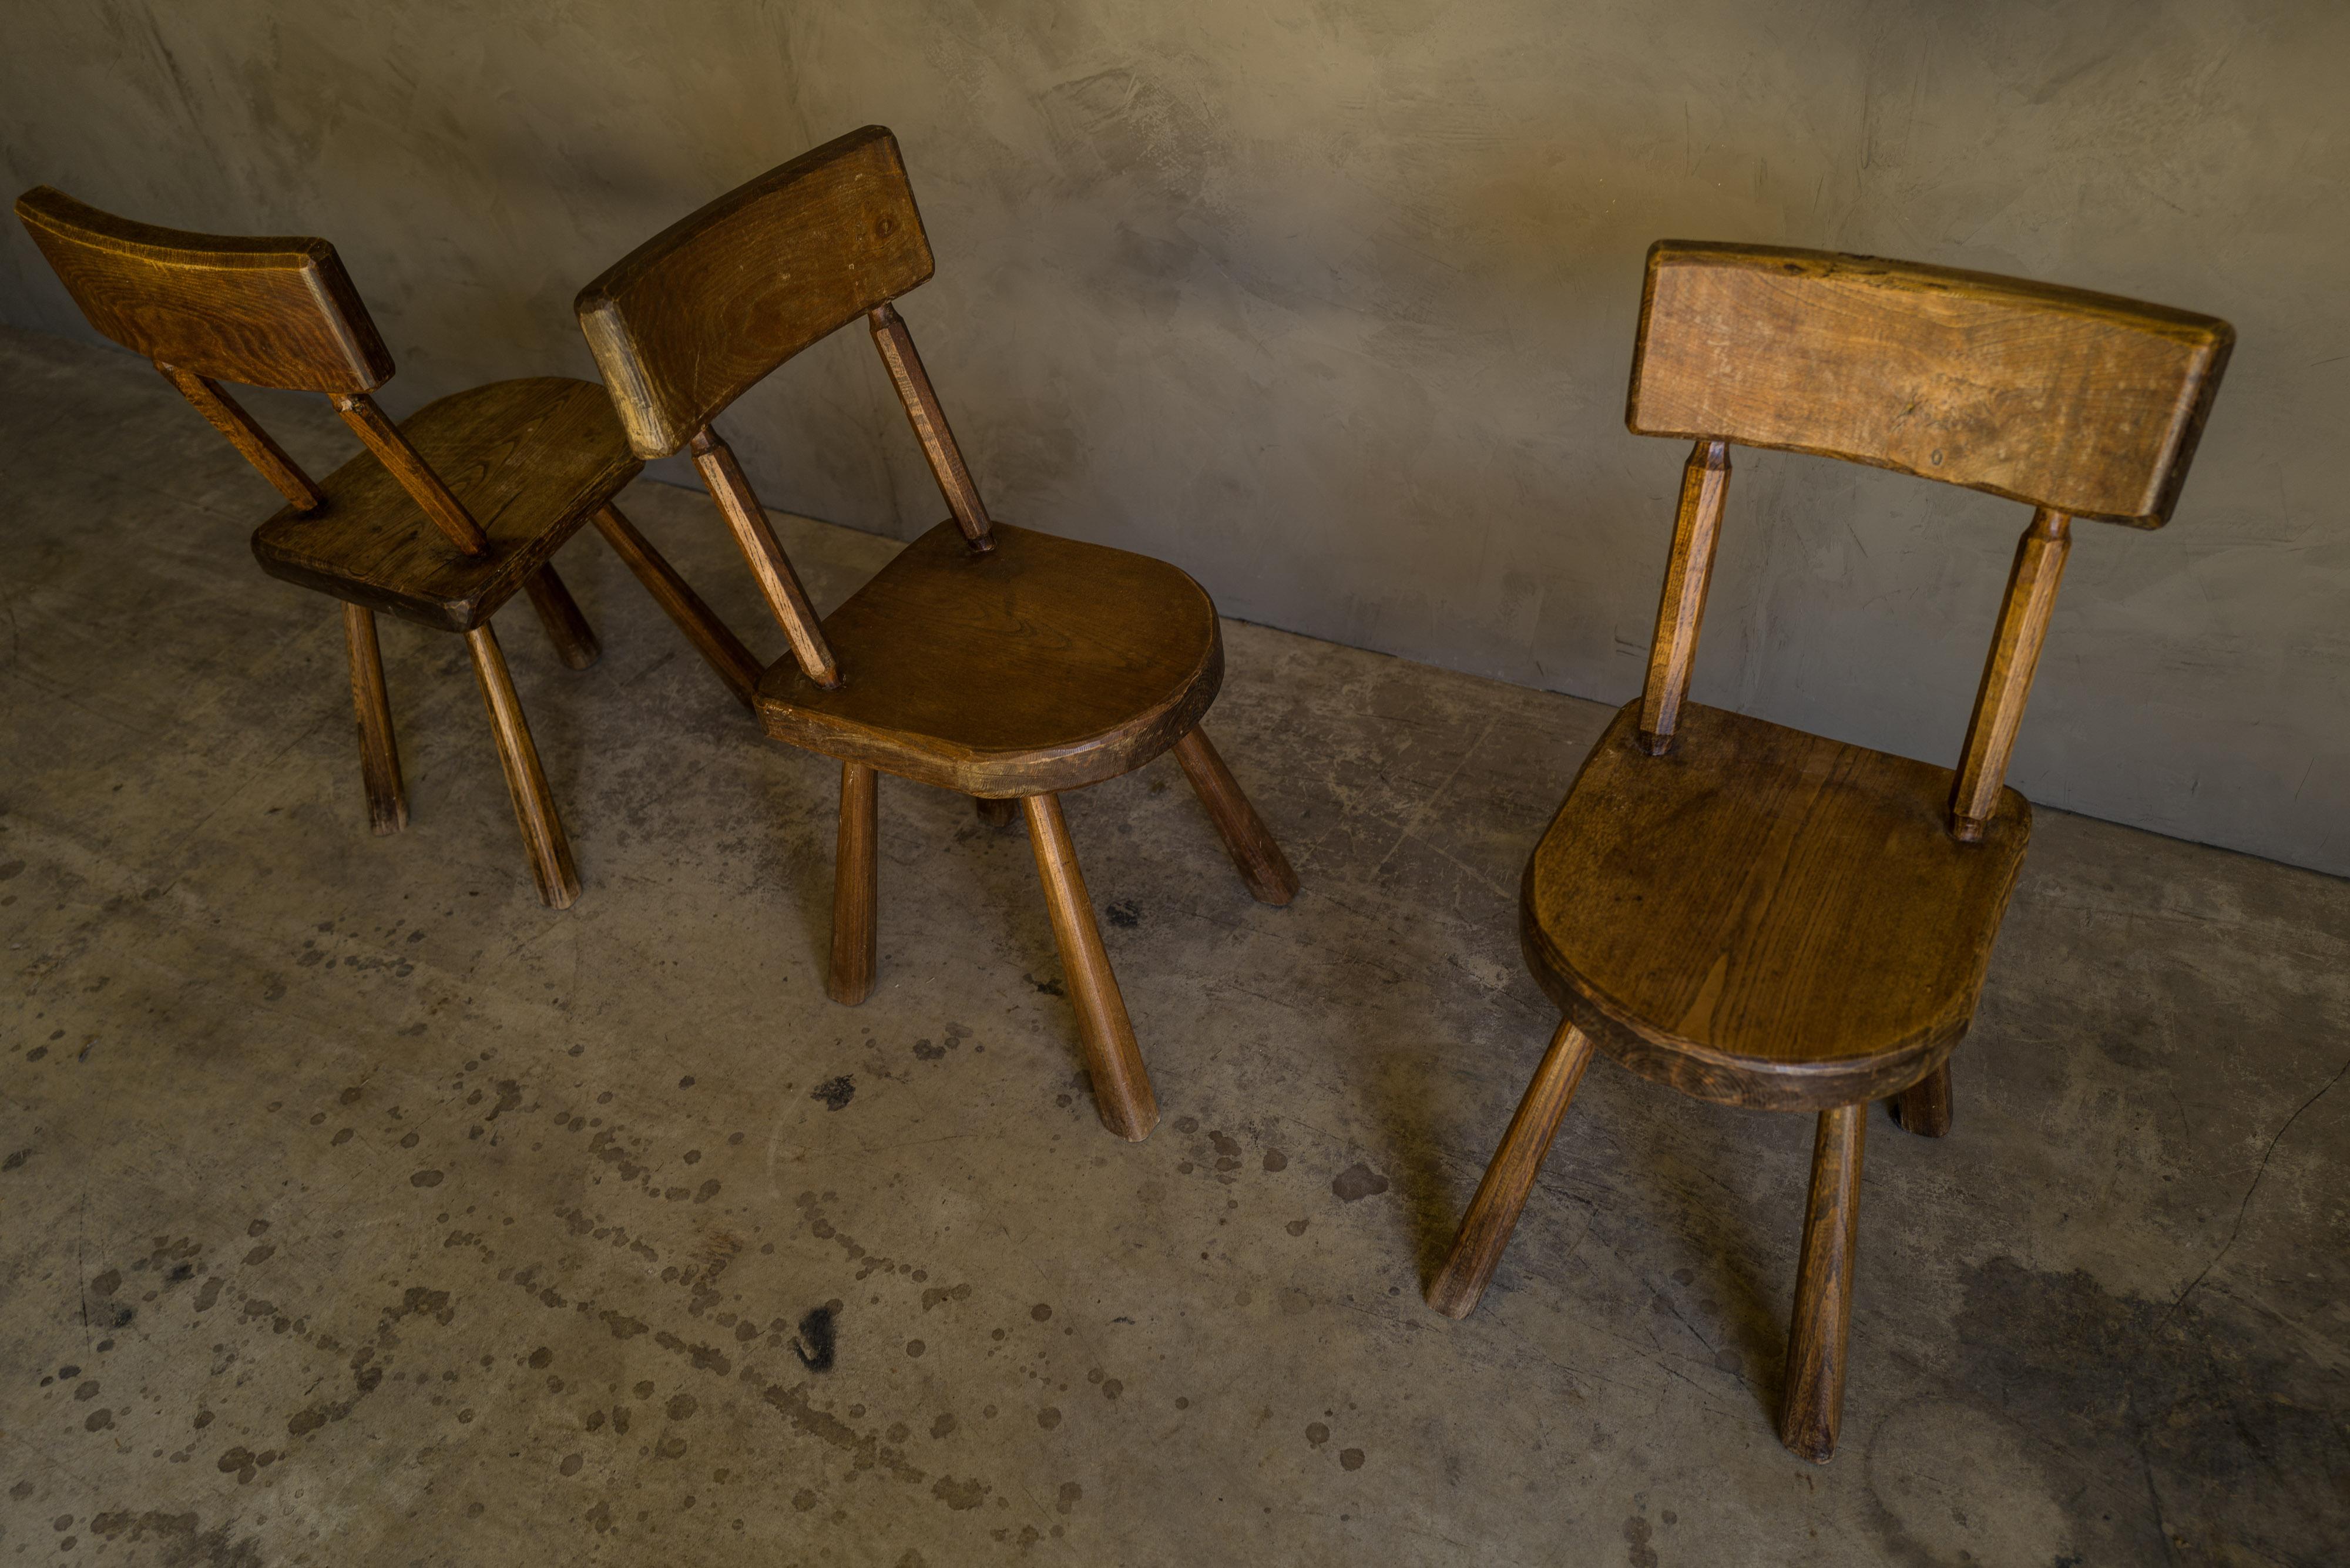 Mid-20th Century Set of Three Vintage Oak Chairs from France, circa 1950